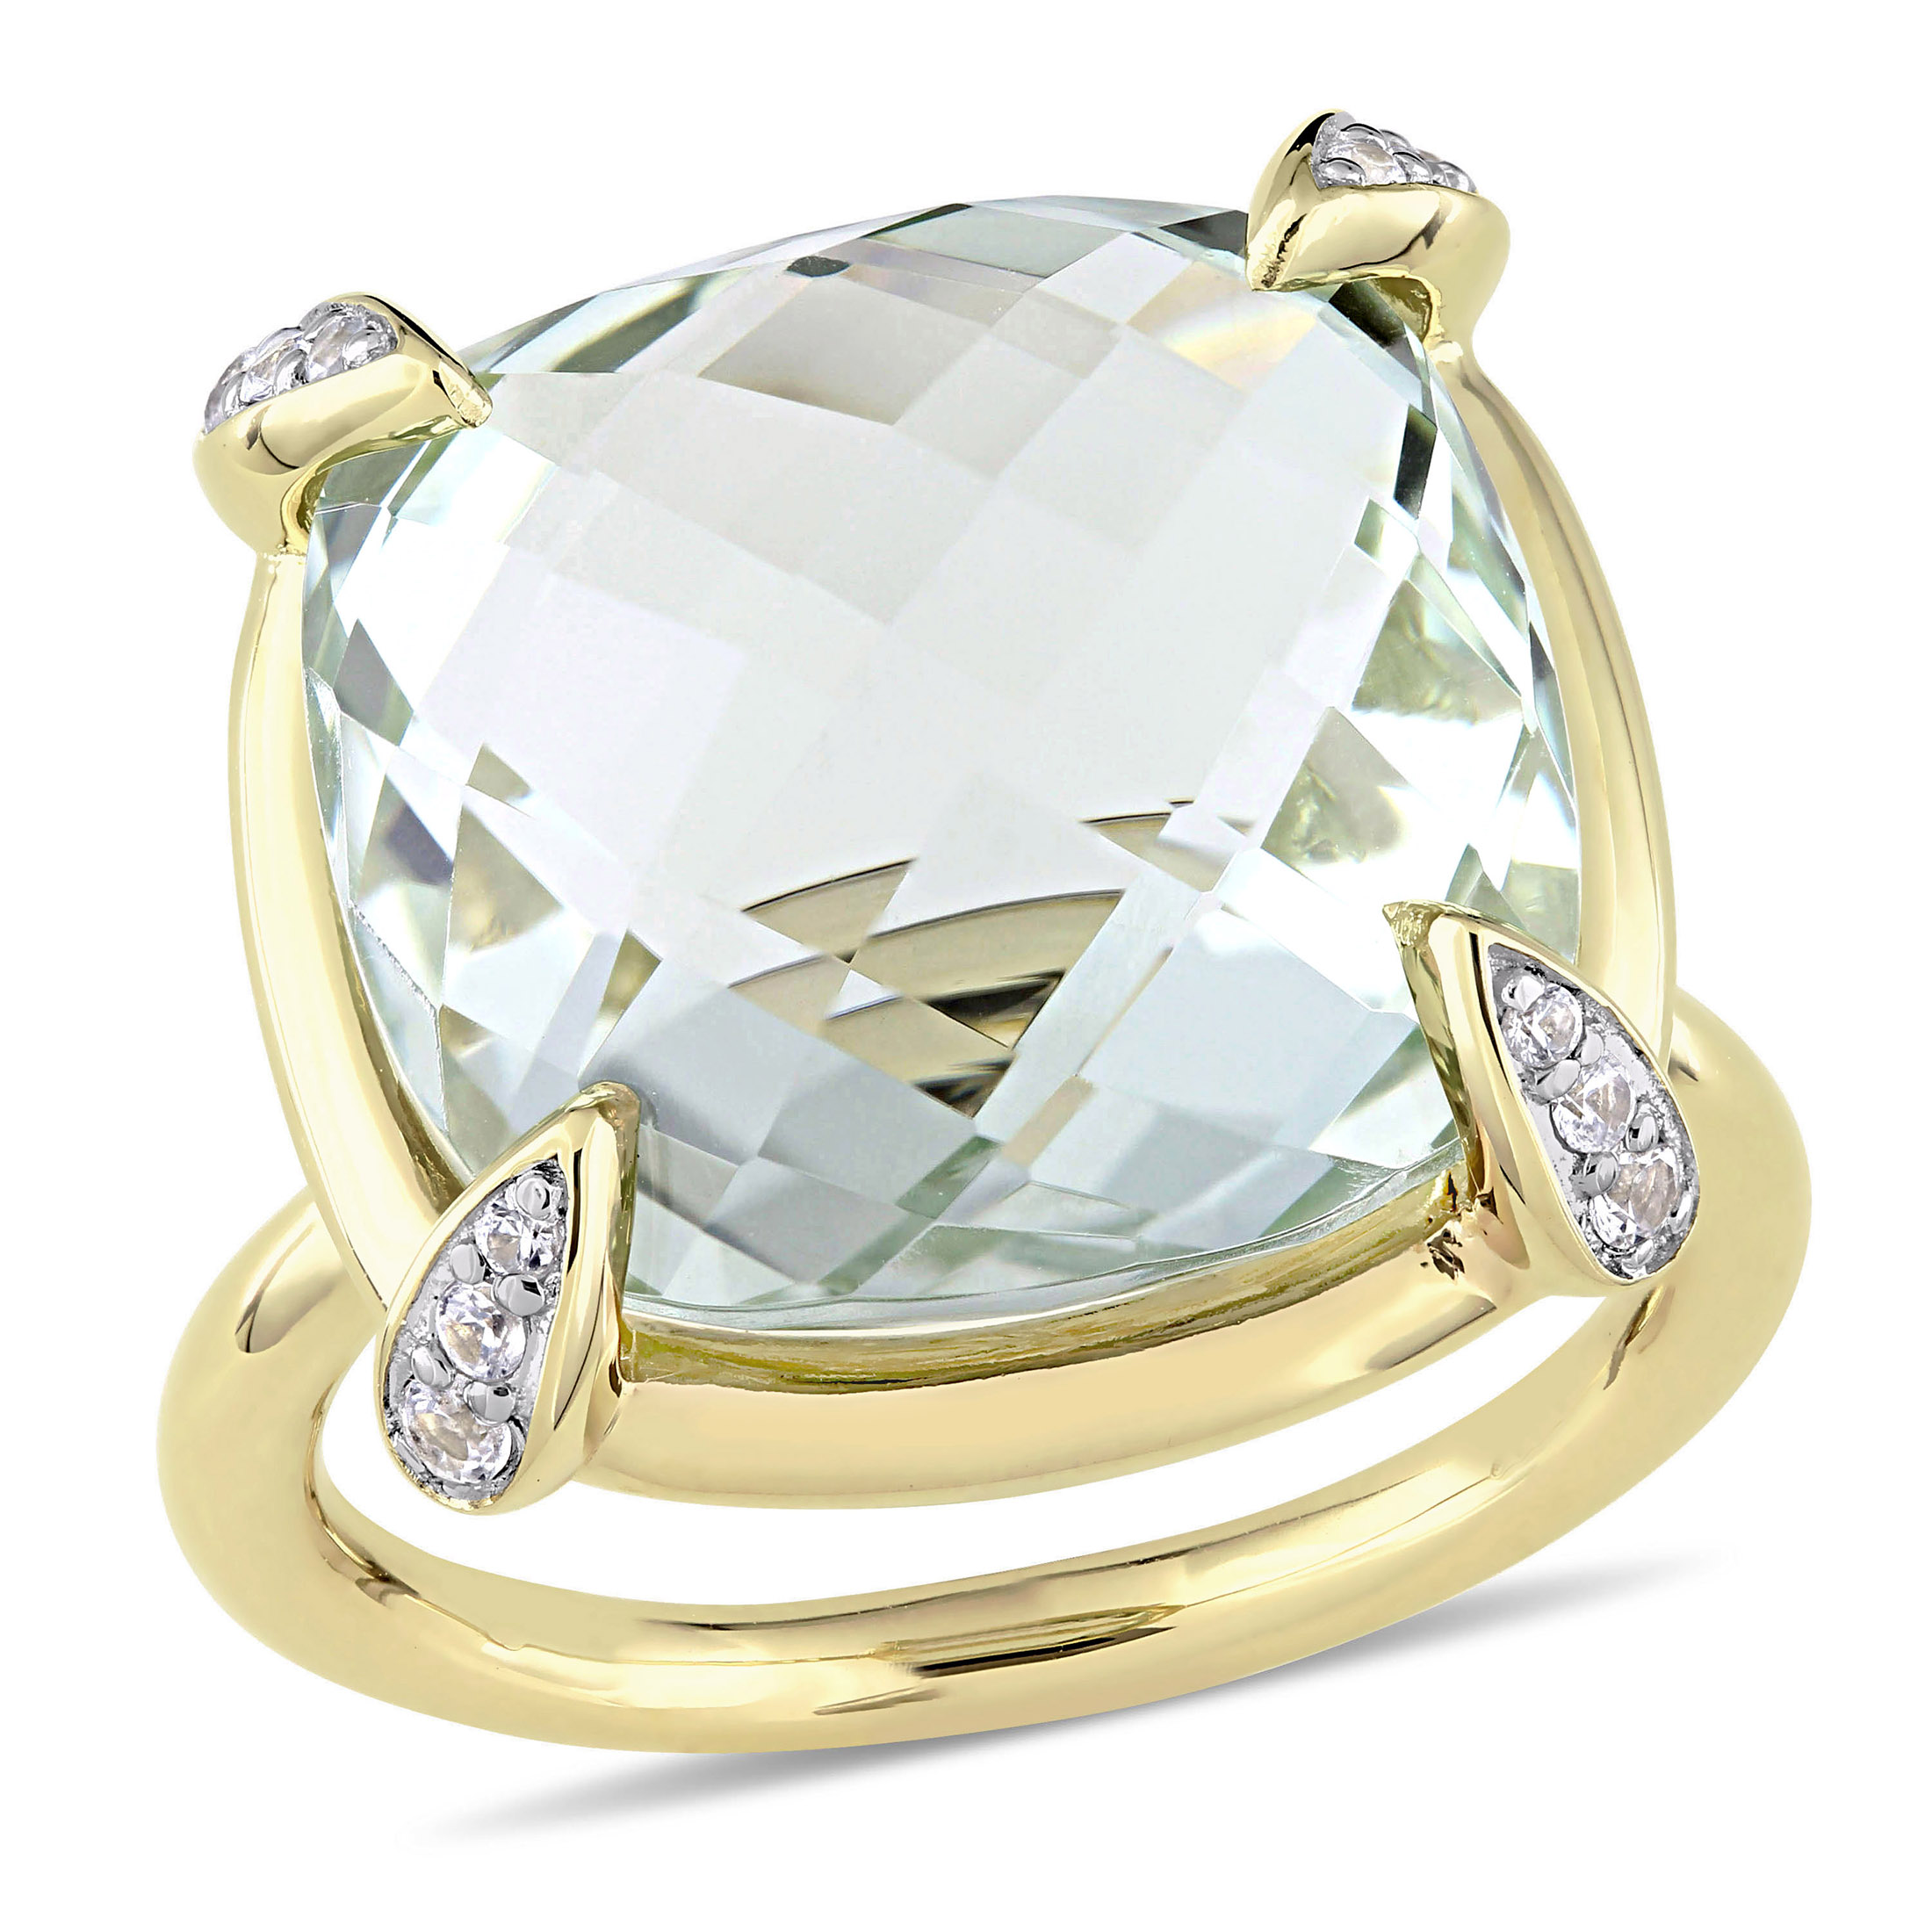 Miabella Women's 15-1/8 Carat T.G.W. Cushion Double Checkerboard-Cut Green Quartz and Round-Cut White Sapphire 14kt Yellow Gold Cocktail Ring - image 1 of 7